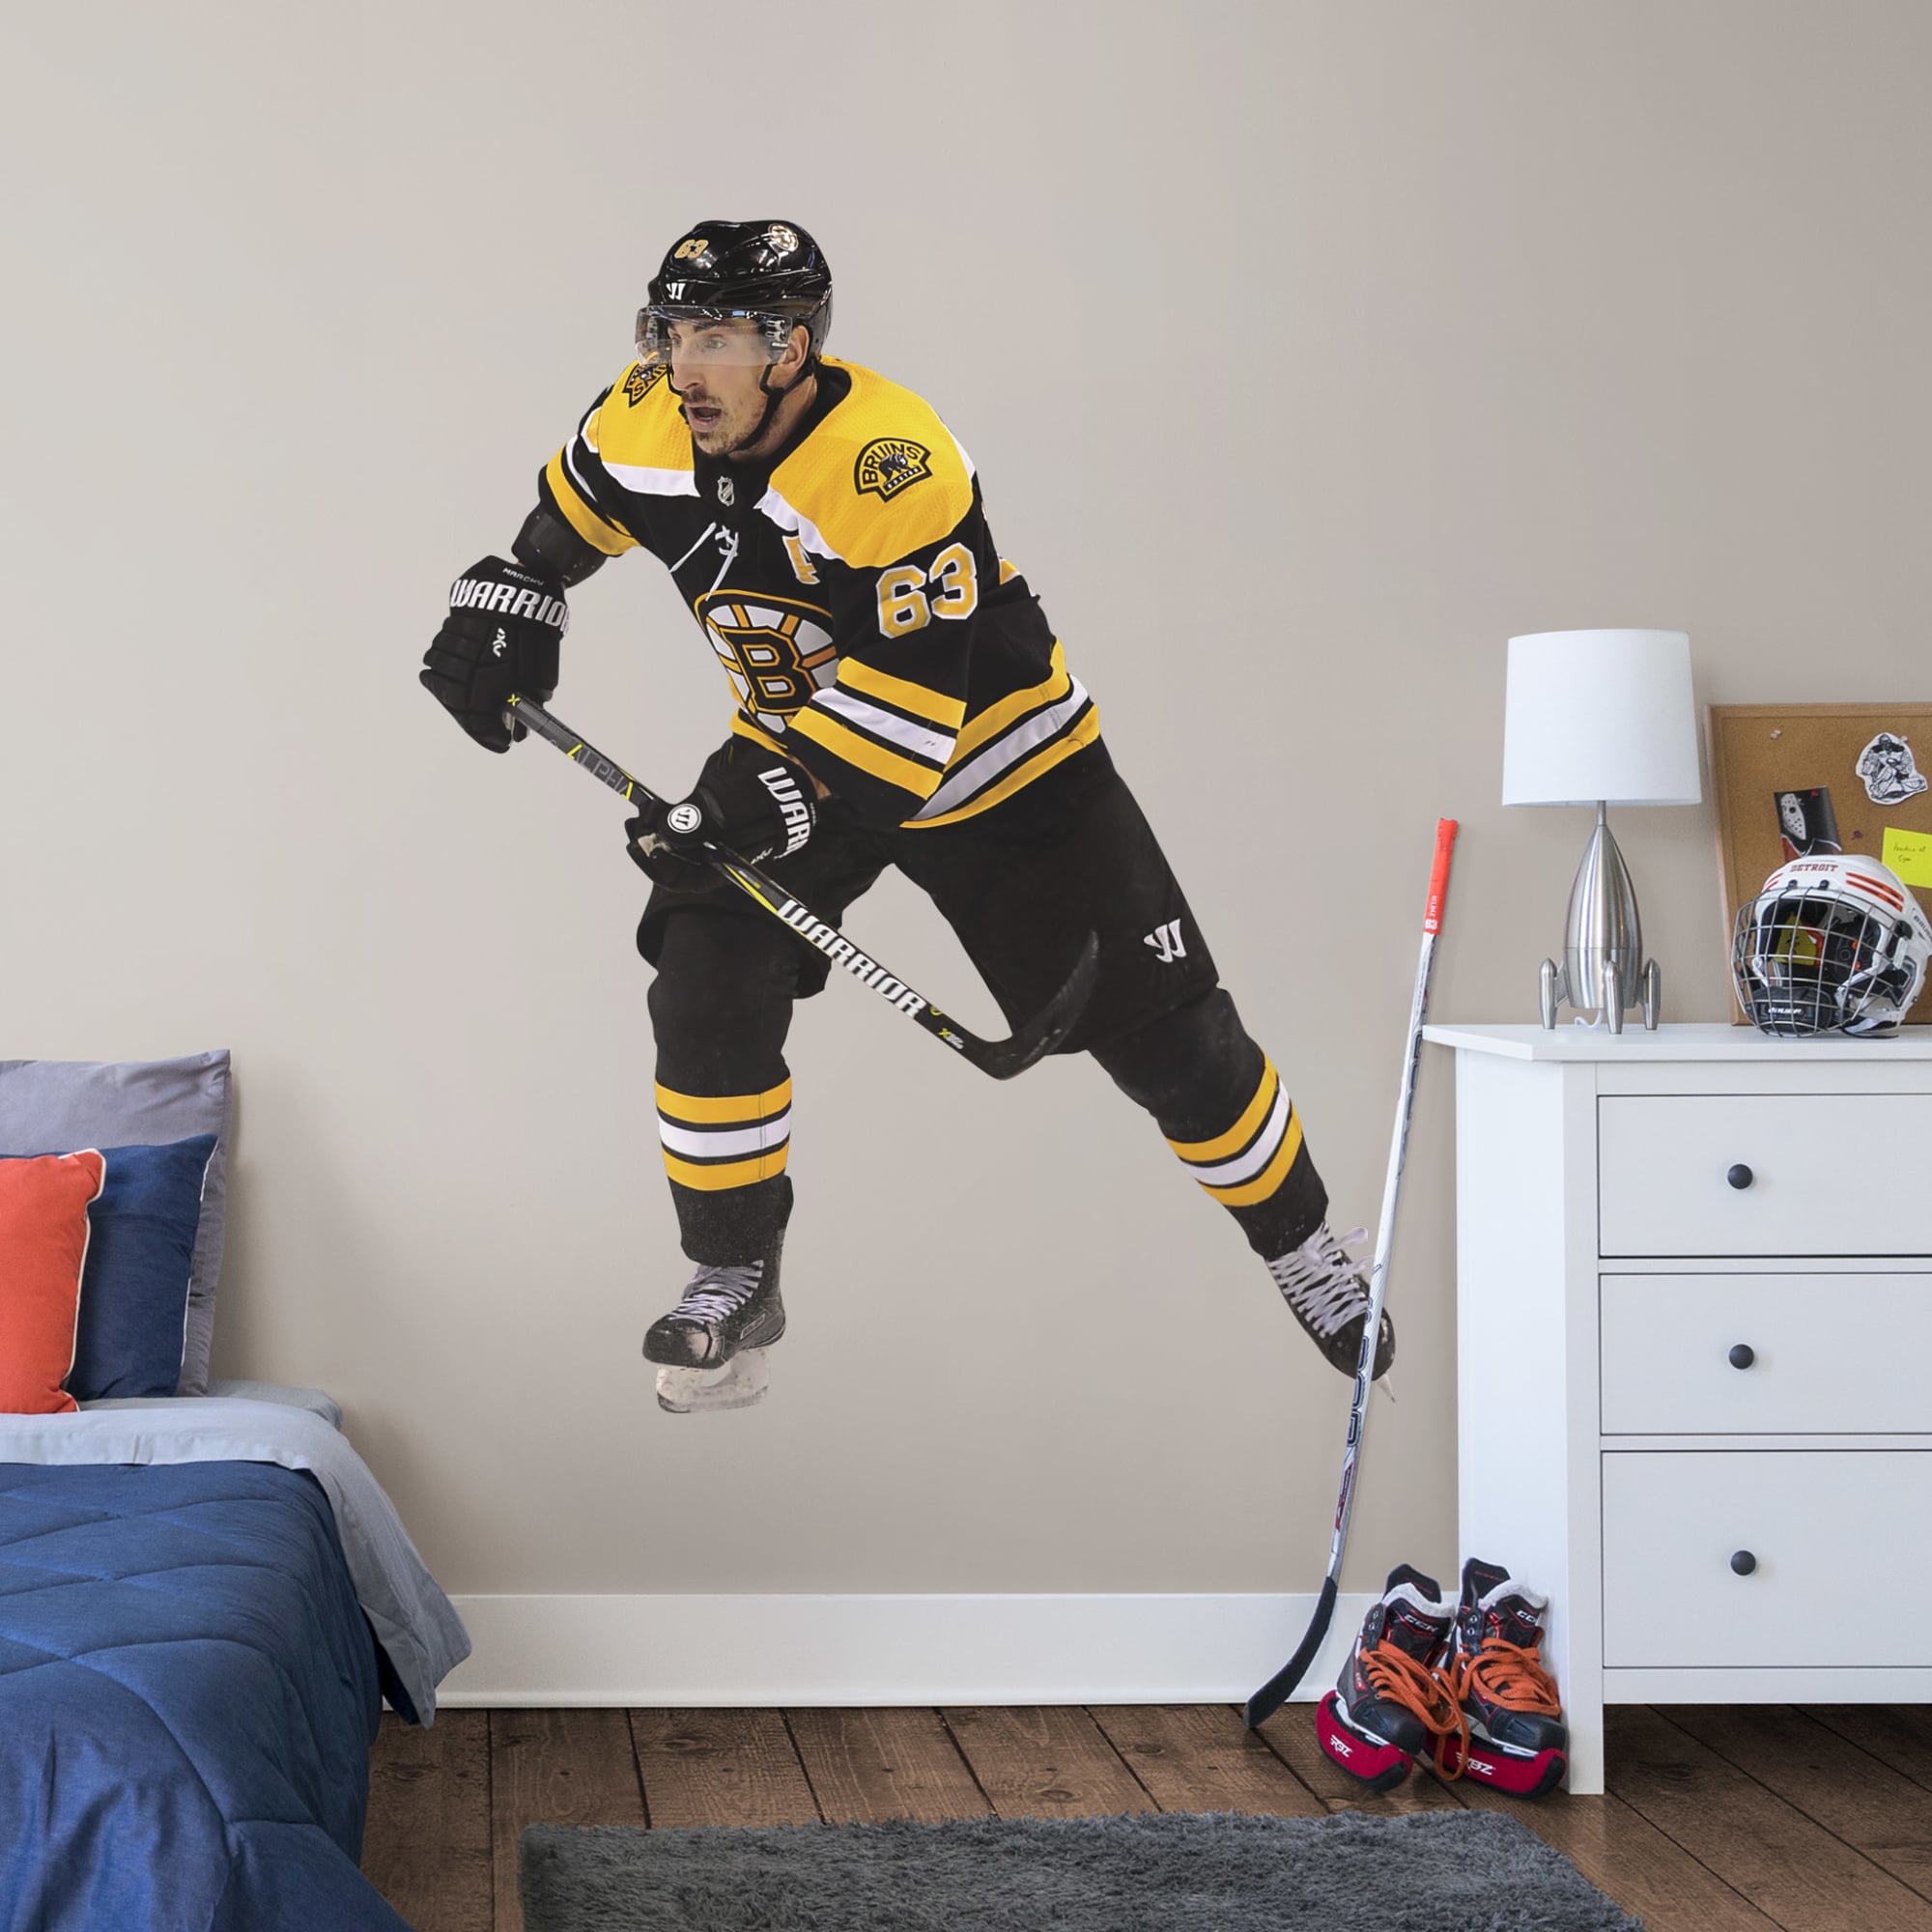 Brad Marchand for Boston Bruins - Officially Licensed NHL Removable Wall Decal Giant Athlete + 2 Decals (38"W x 46"H) by Fathead